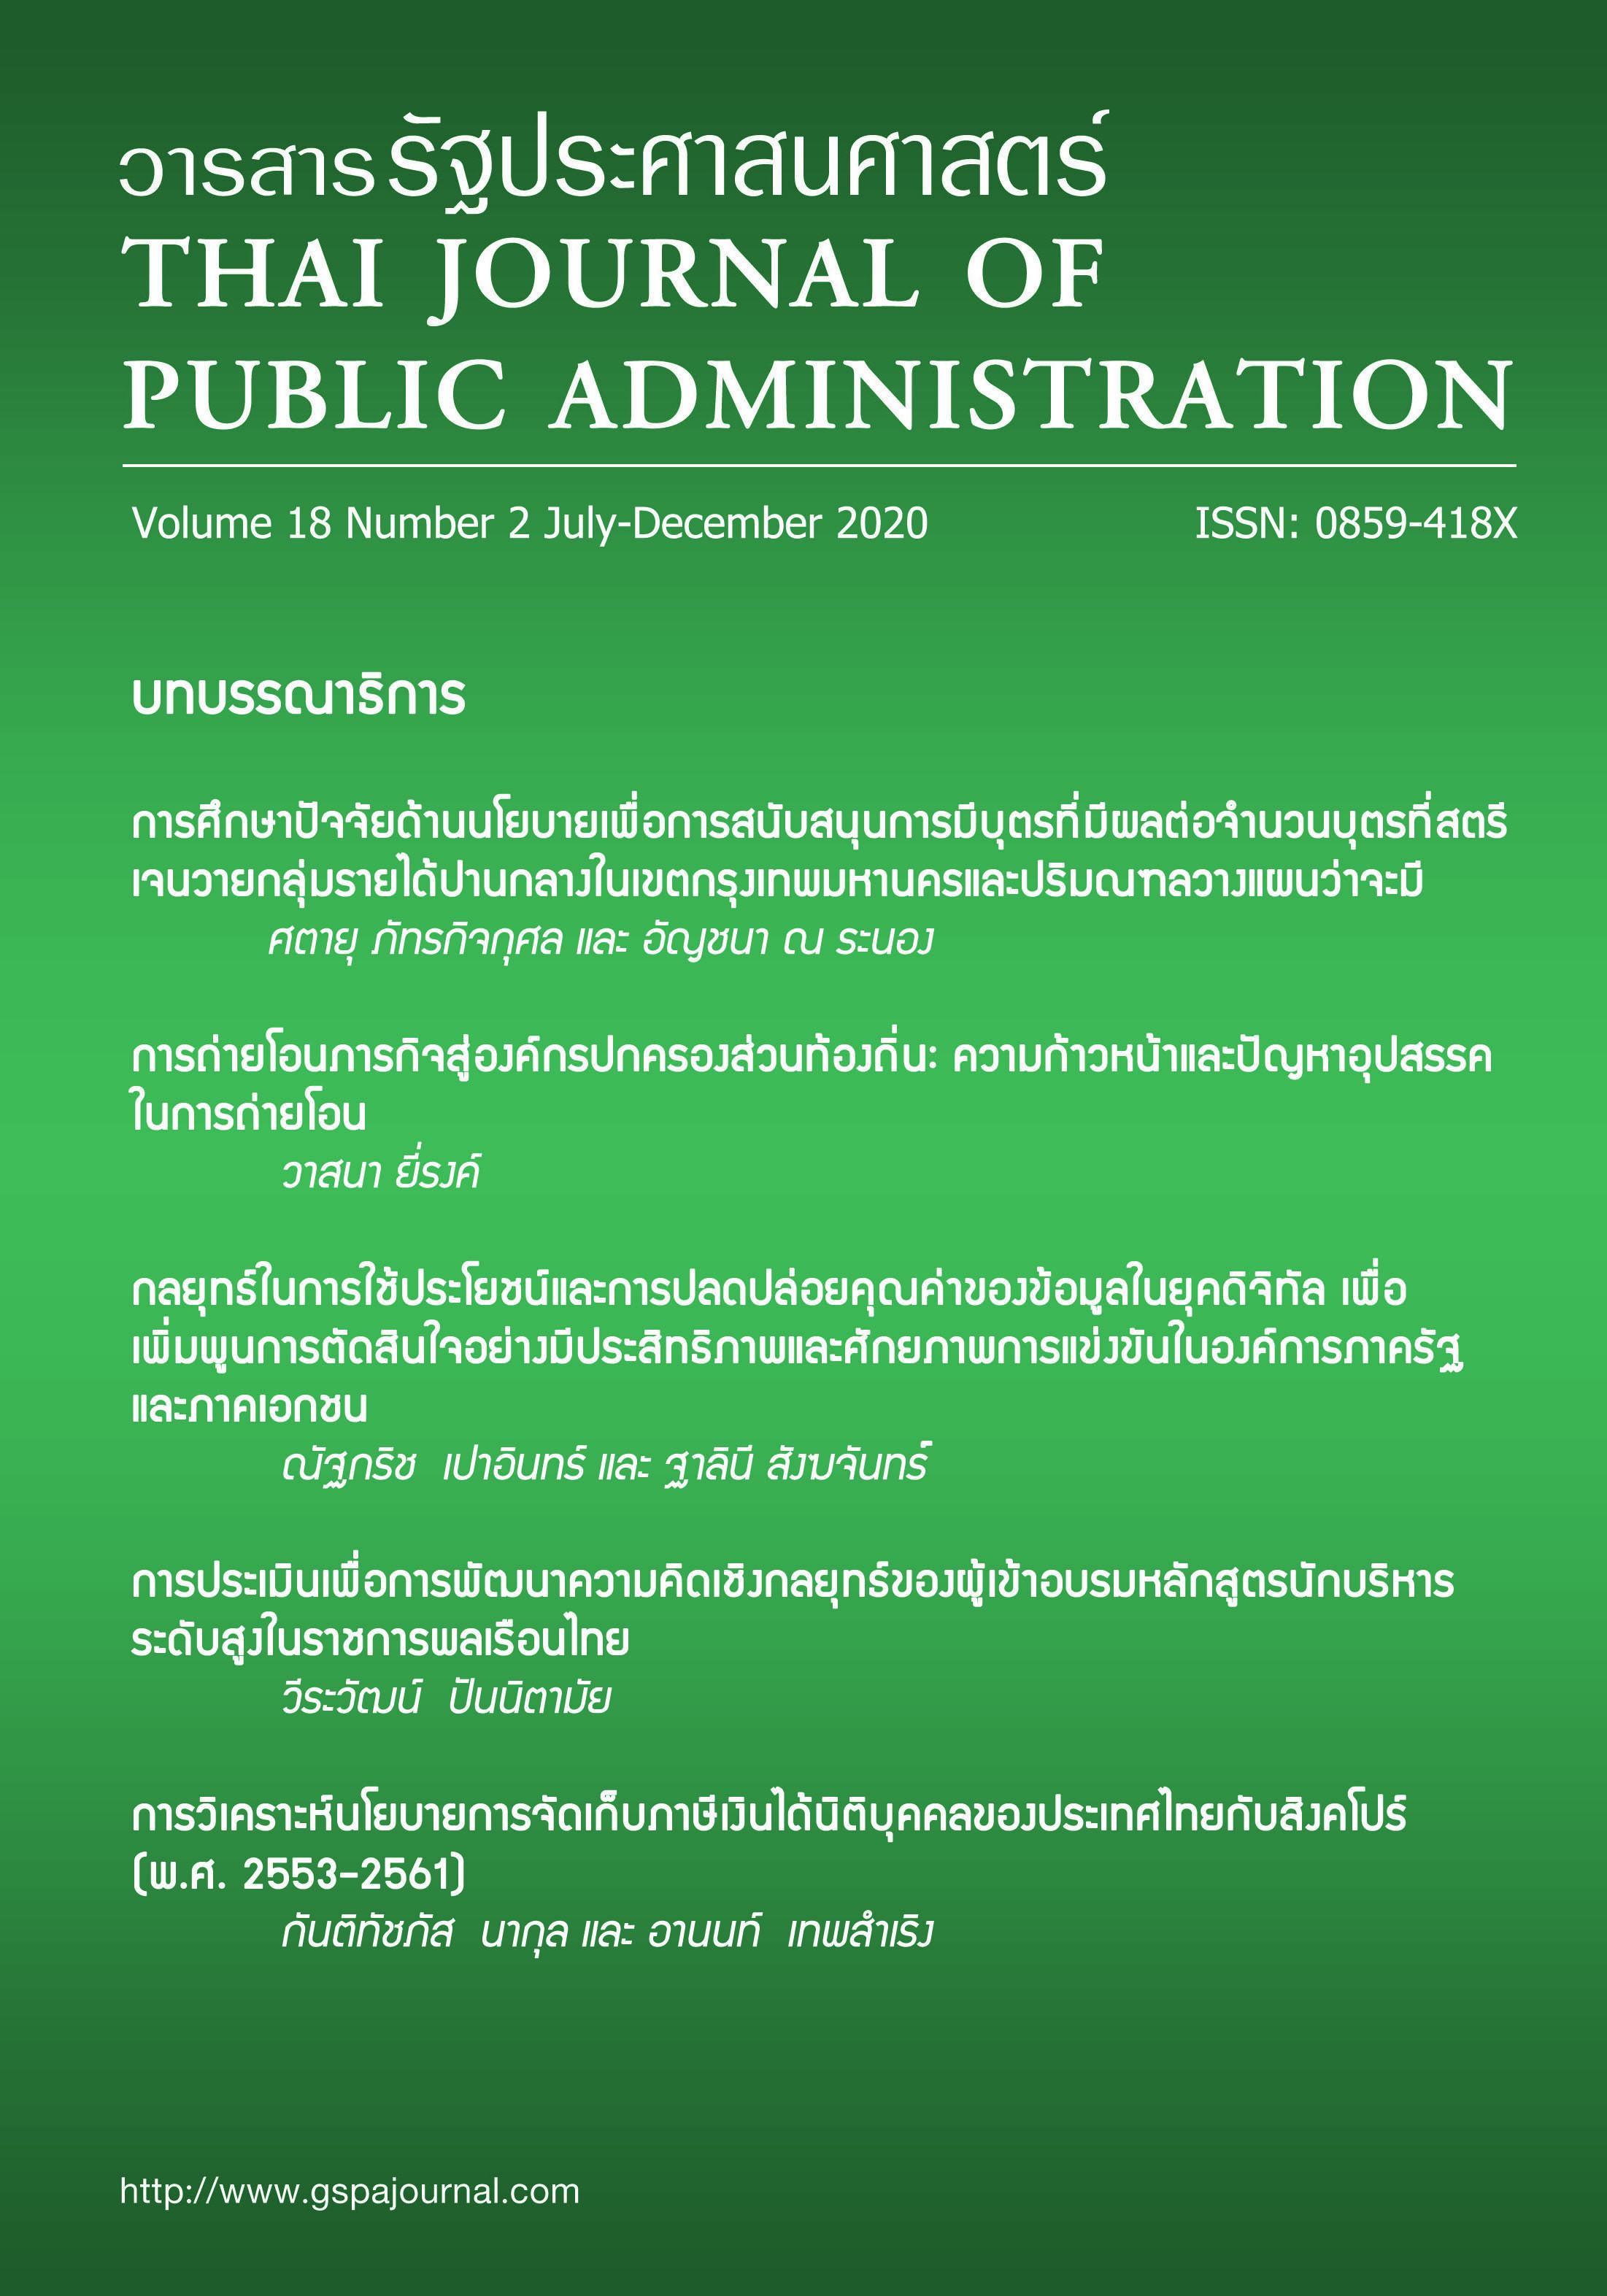 					View Vol. 18 No. 2 (2020): Thai Journal of Public Administration Volume 18 Number 2
				